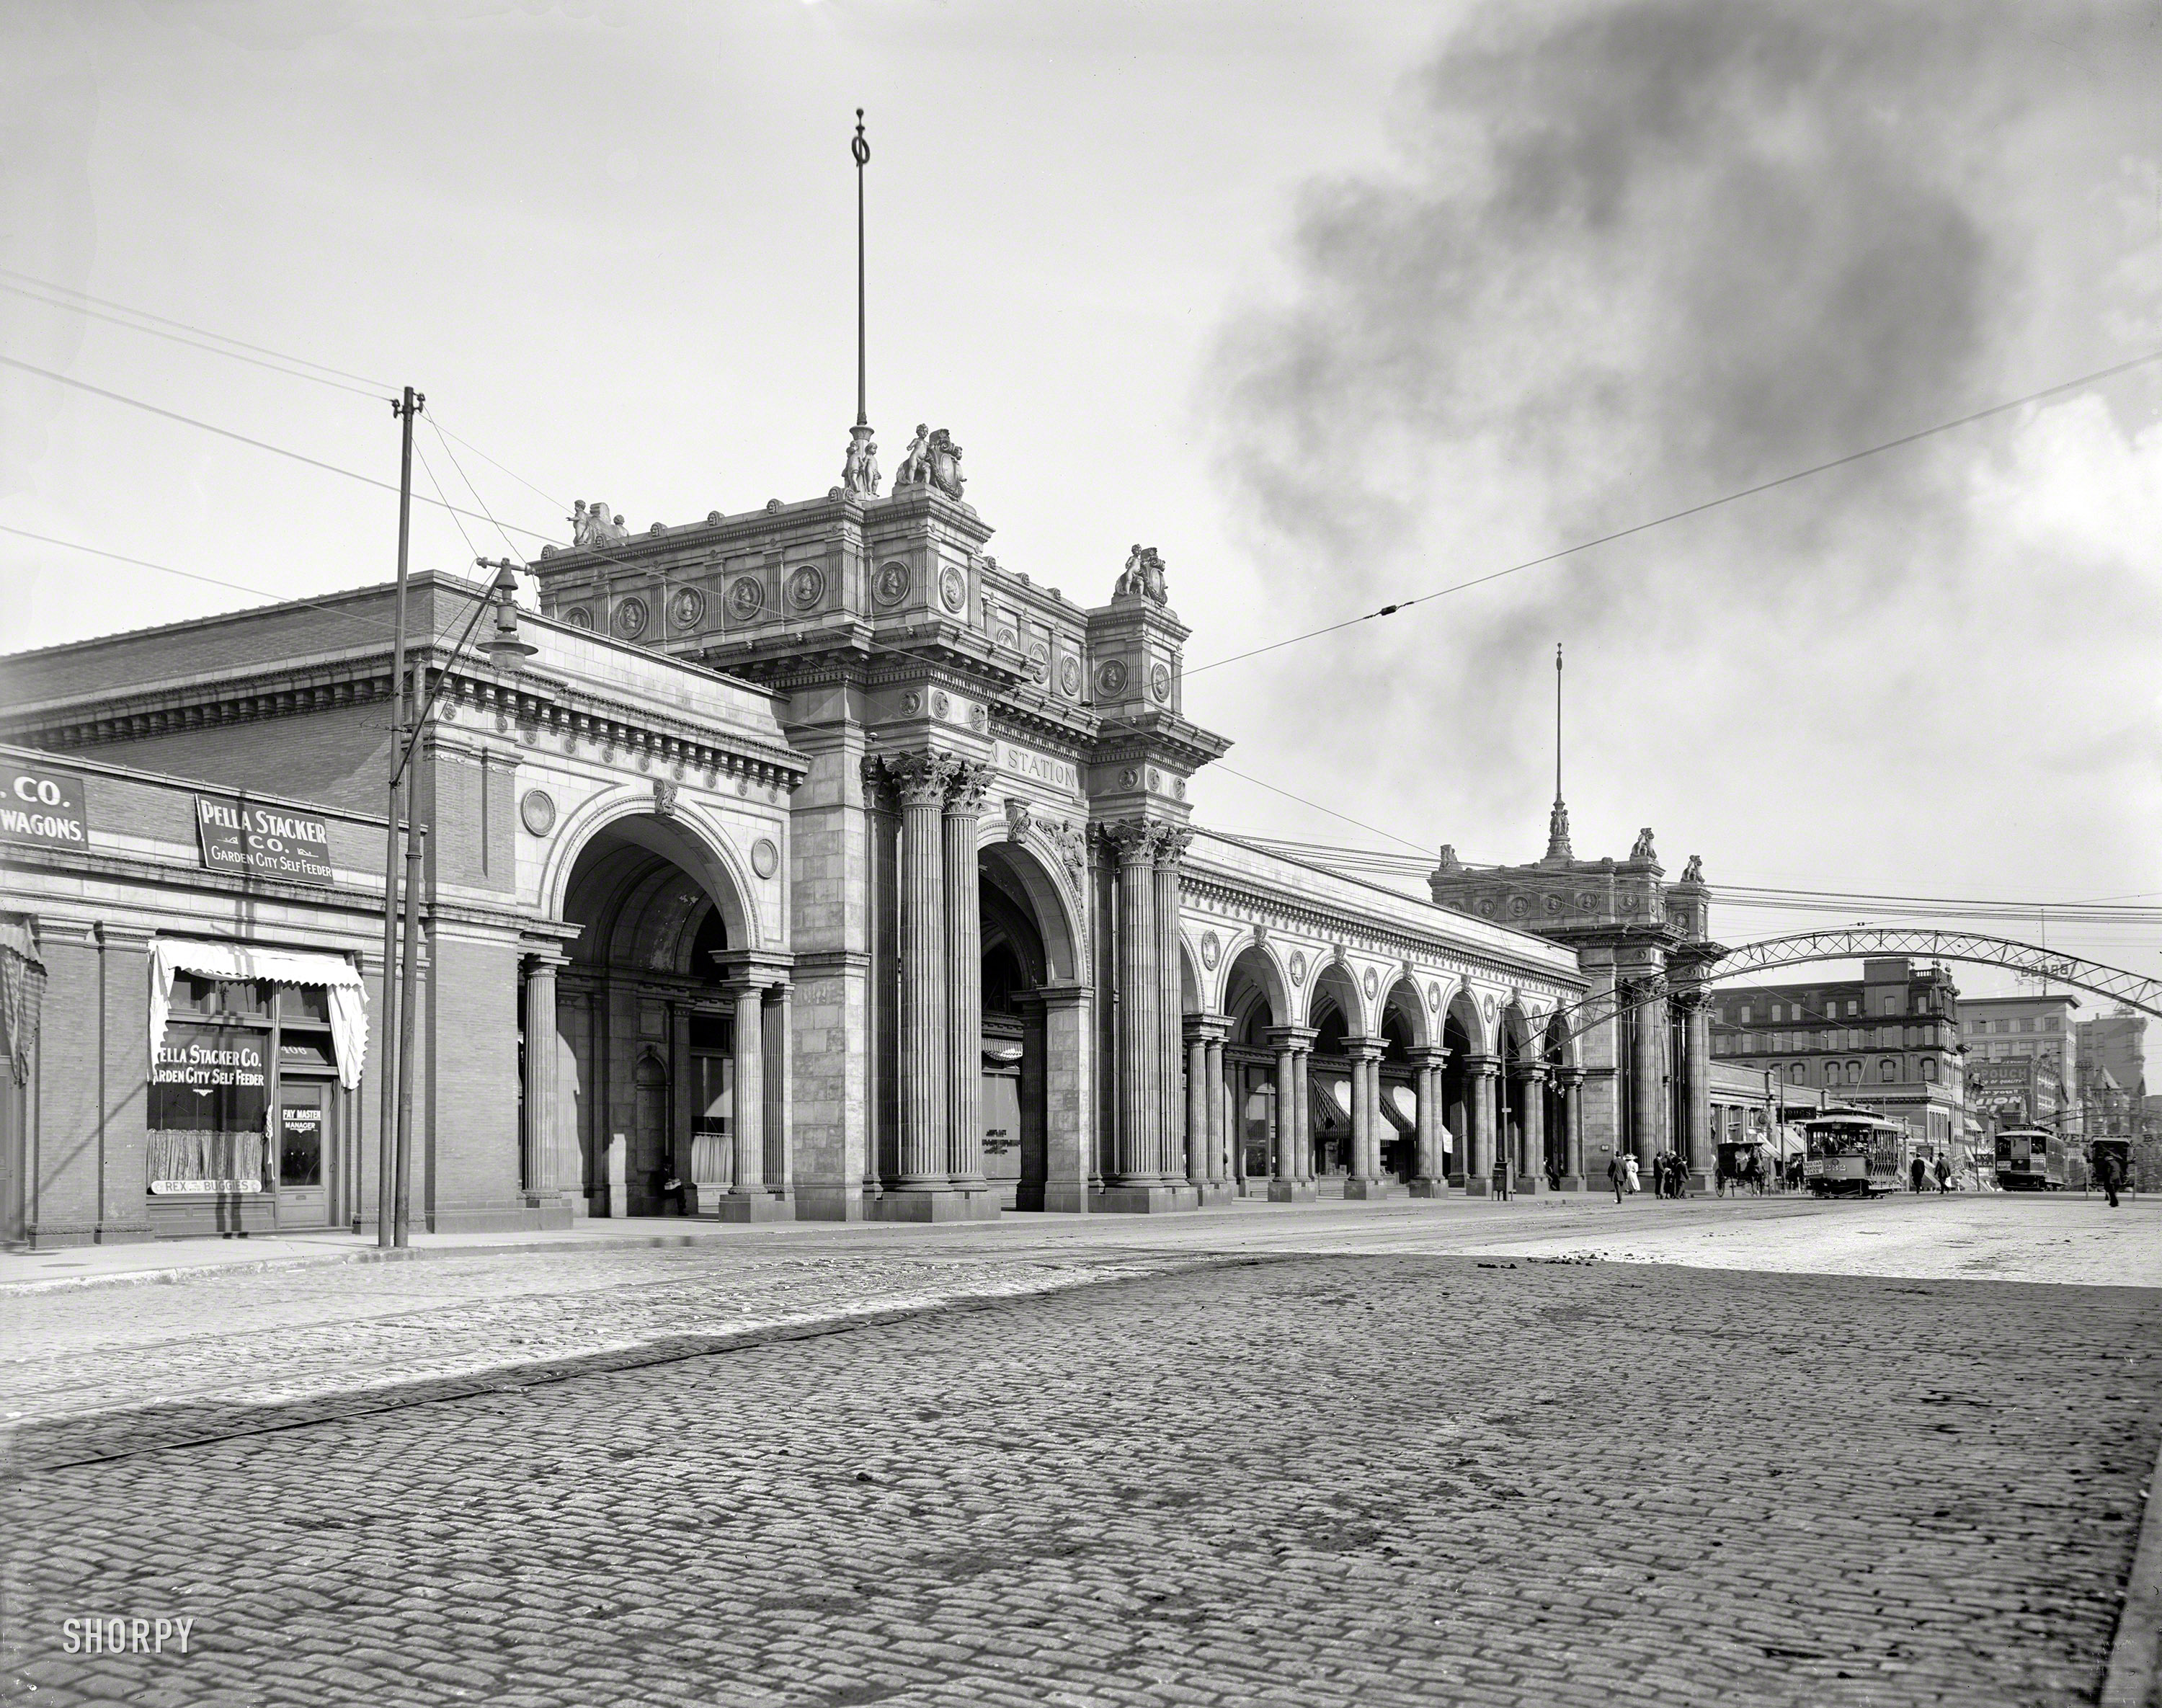 Circa 1910. "Union Station, Columbus, Ohio." Your headquarters for the Garden City Self Feeder, whatever that is. Continuing our tour of Columbus on Columbus Day. 8x10 glass negative, Detroit Publishing Co. View full size.